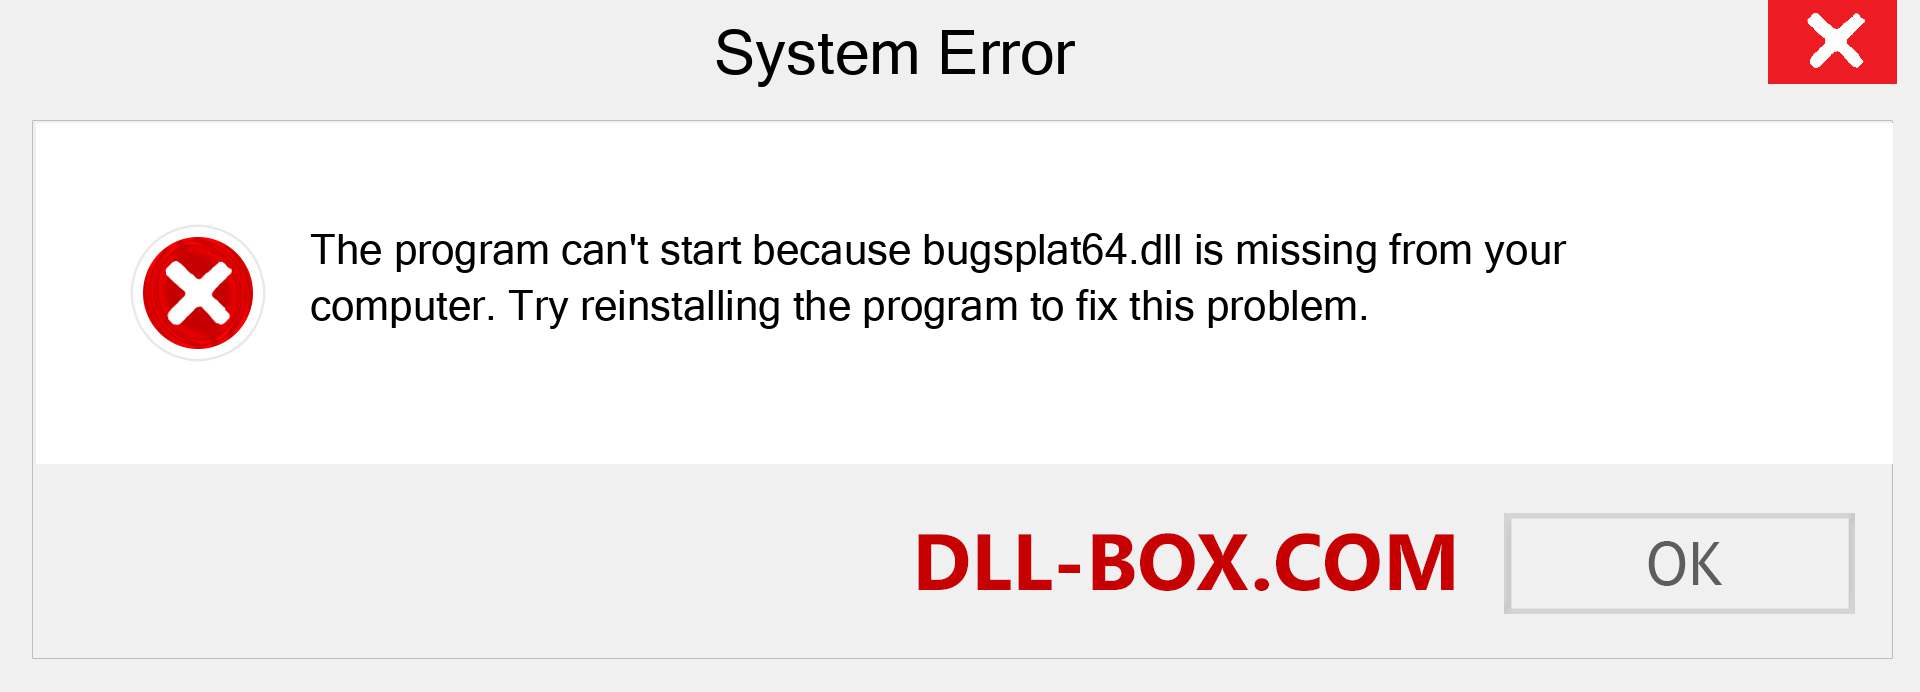  bugsplat64.dll file is missing?. Download for Windows 7, 8, 10 - Fix  bugsplat64 dll Missing Error on Windows, photos, images